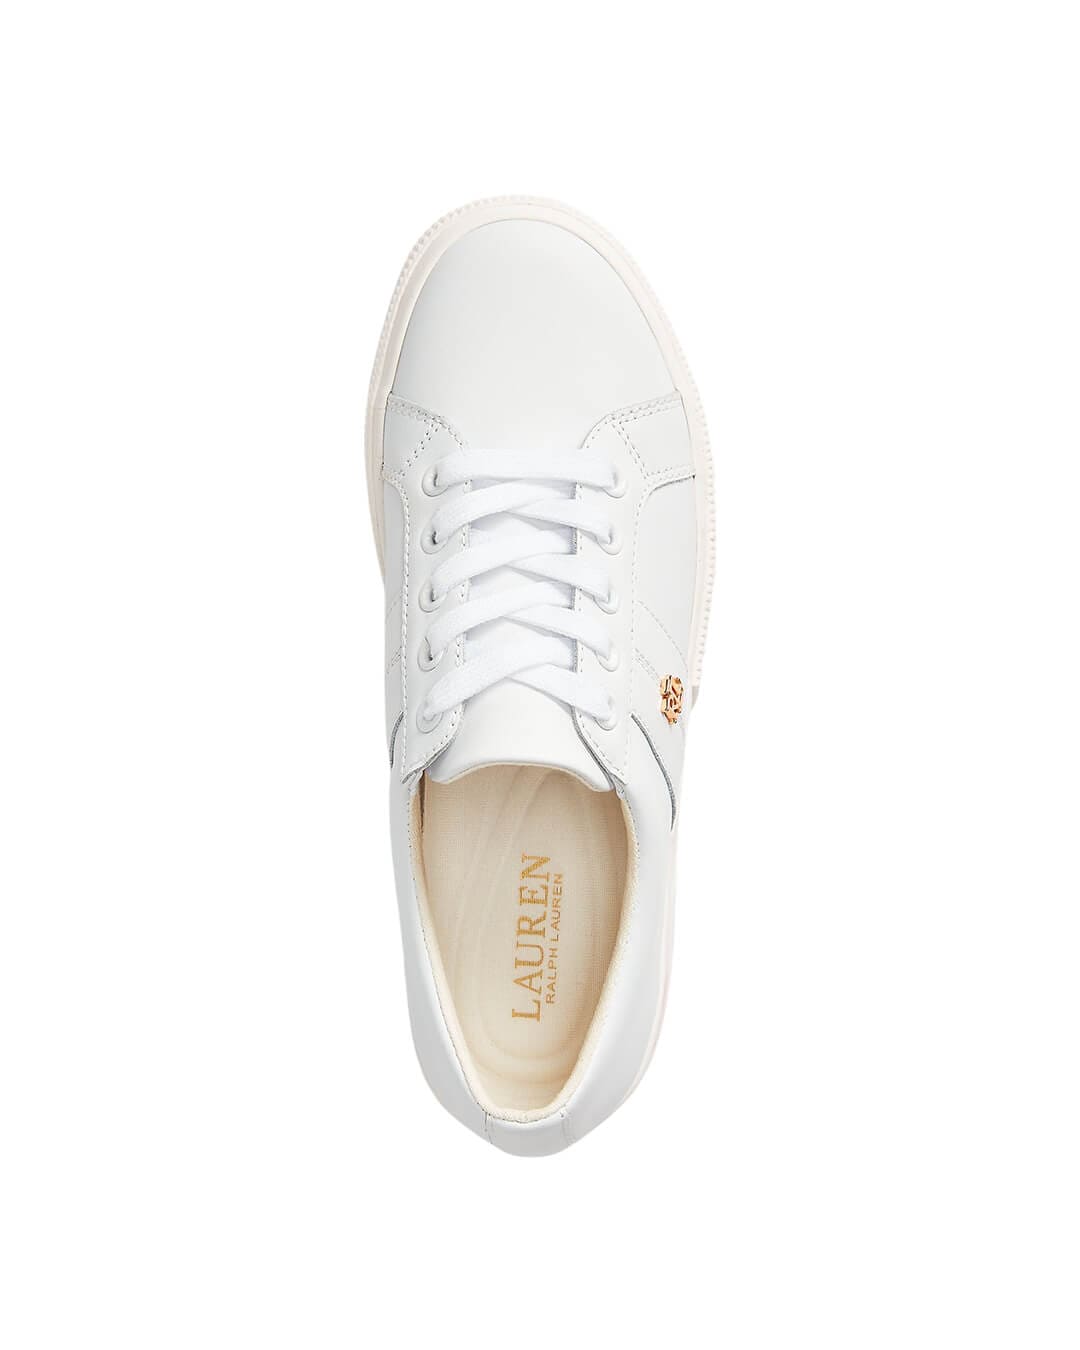 Lauren By Ralph Lauren Shoes Lauren By Ralph Lauren White Classic Sneakers